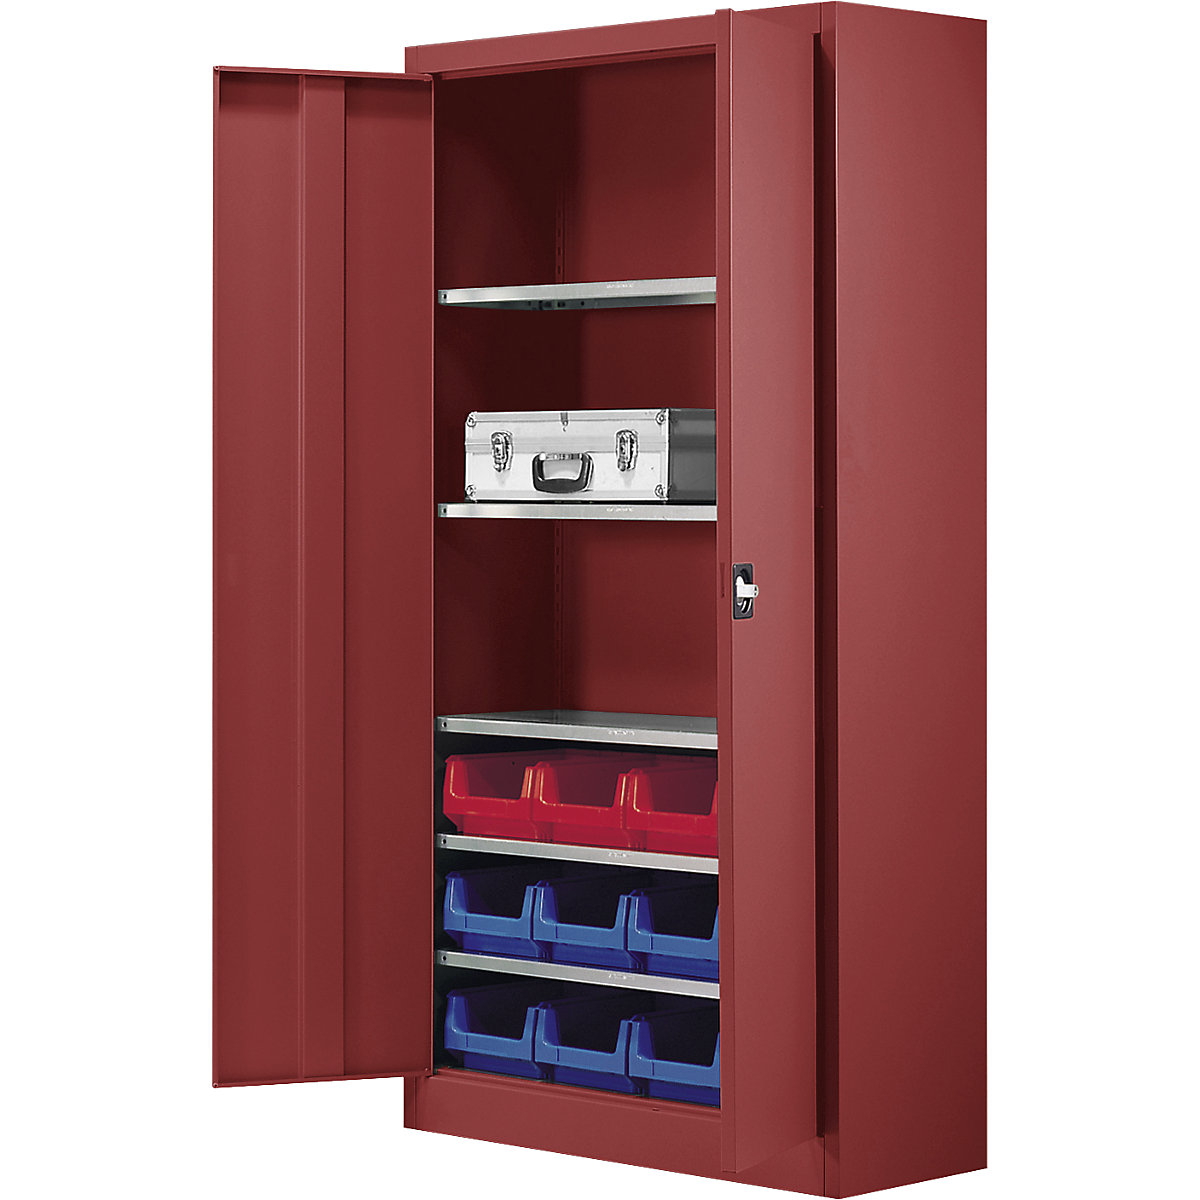 Storage cupboard, single colour – mauser, with 12 open fronted storage bins, 5 shelves, red-3